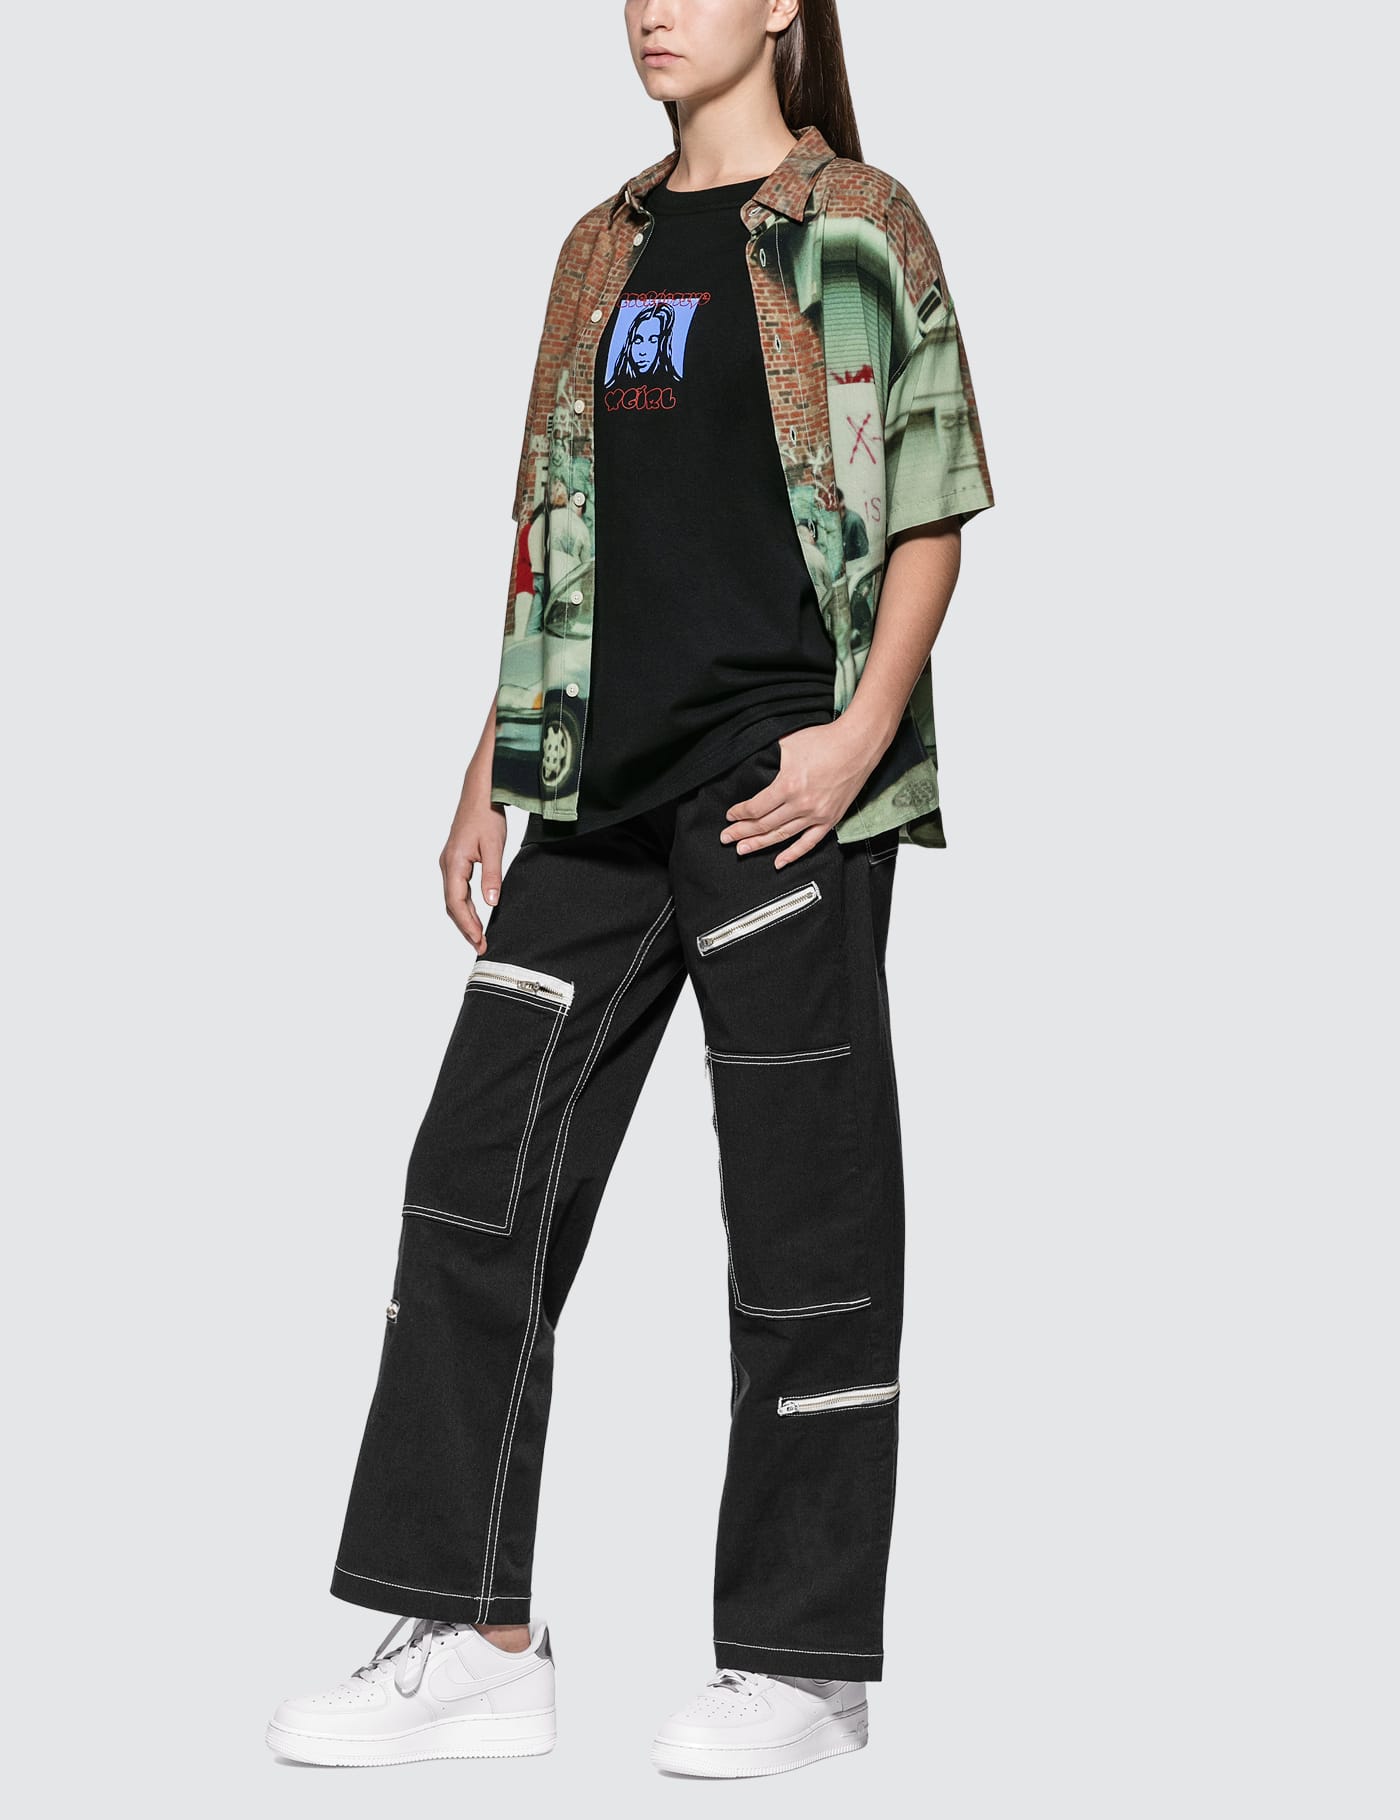 X-Girl - Skater Flight Pants | HBX - Globally Curated Fashion and 